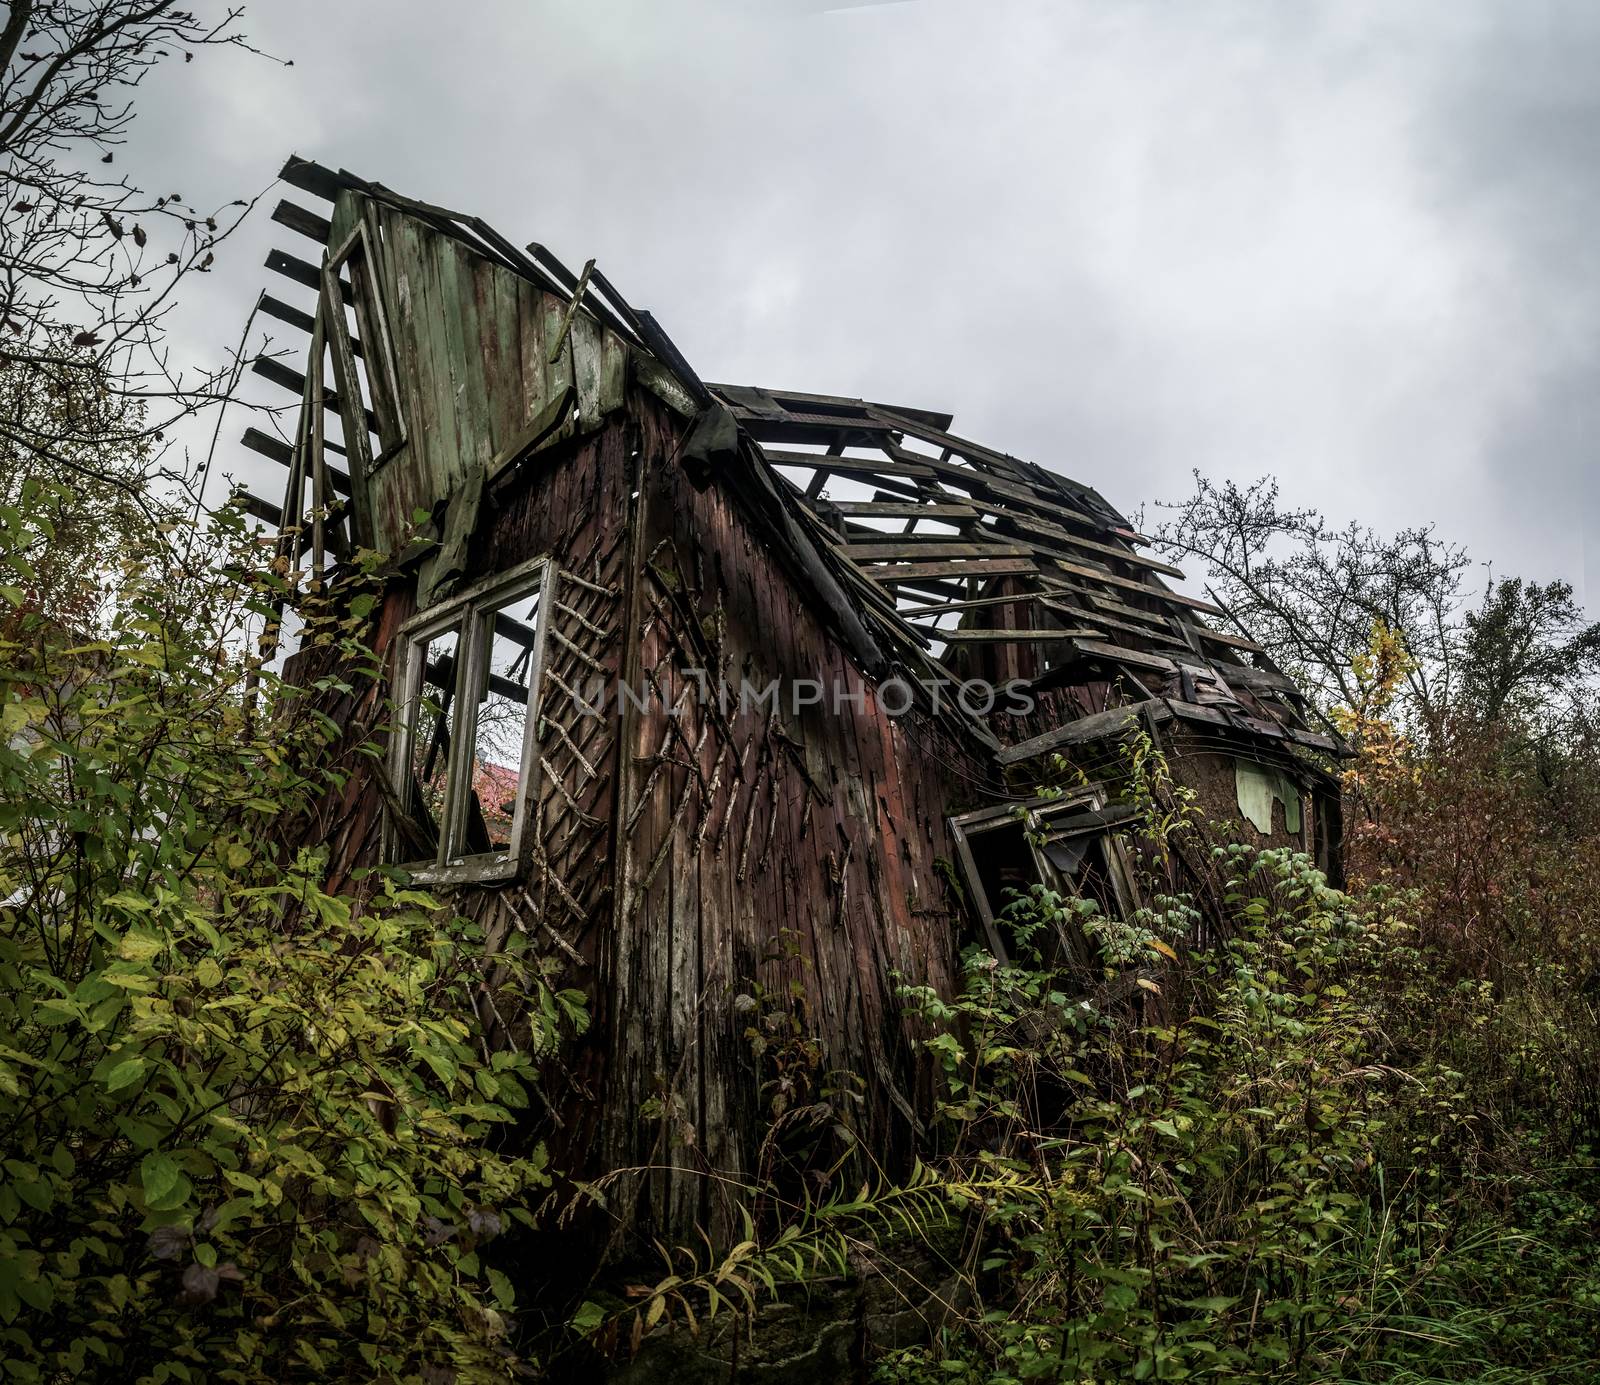 View of the past. The destroyed wooden country house in Ukraine. Brushwood